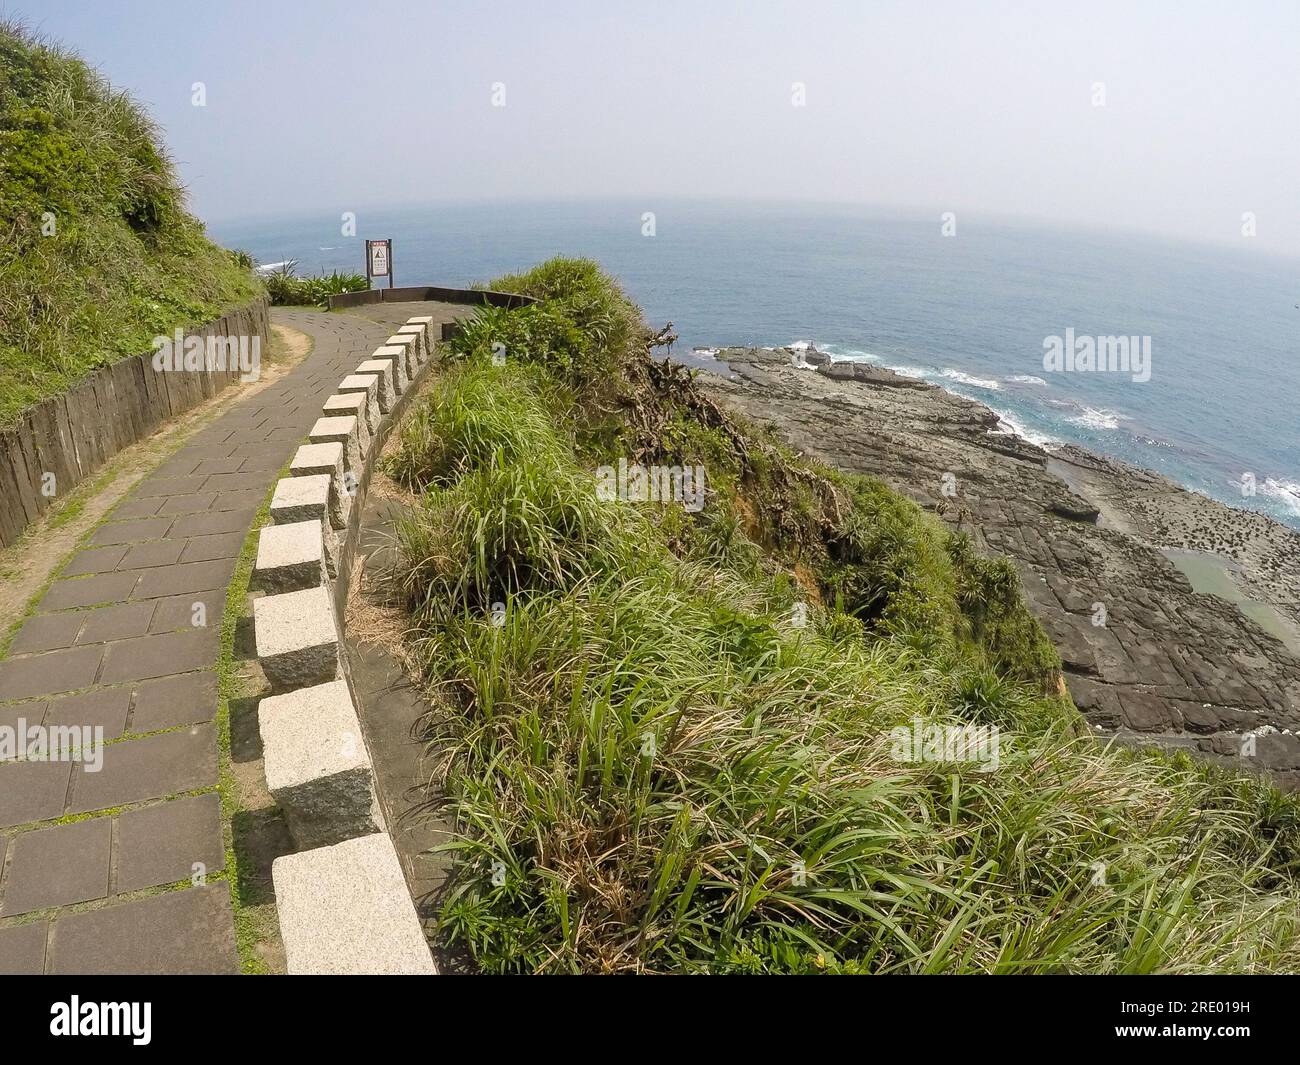 Bitoujiao Trail in Bitou Cape, a famous hiking trail on the mountain ridges in Ruifang the northeastern coast of Taiwan Stock Photo